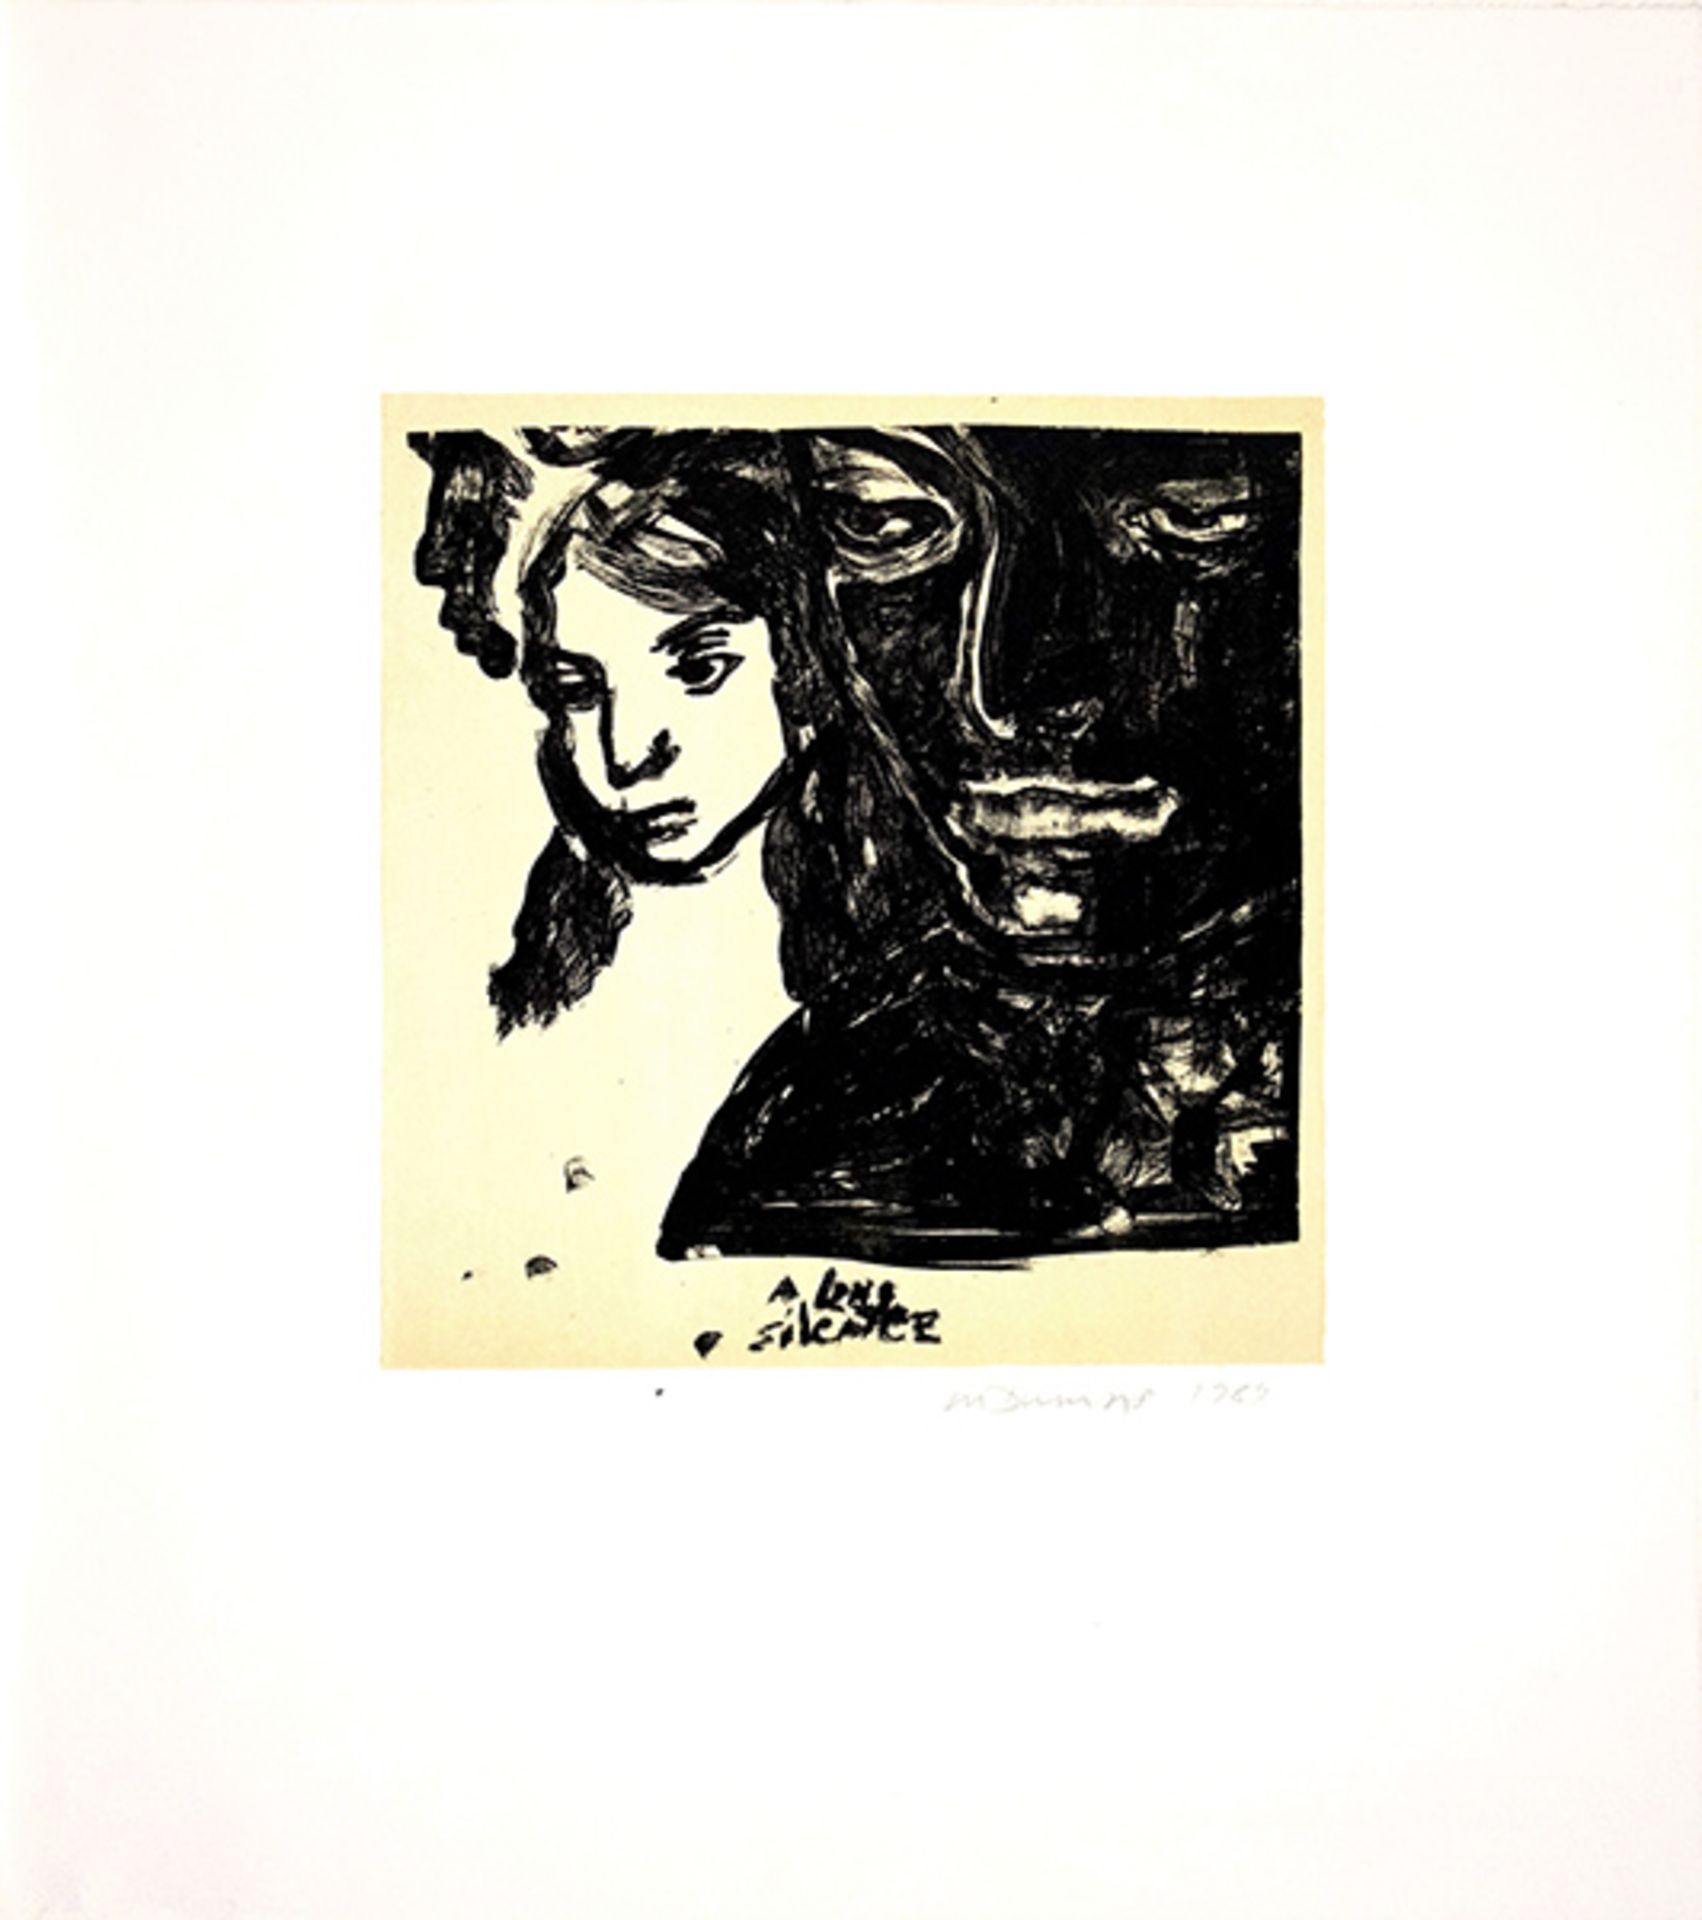 A long silence (1989)Lithograph on Zerkall paper. Signed and dated. Titled in the stone. Sheet size: